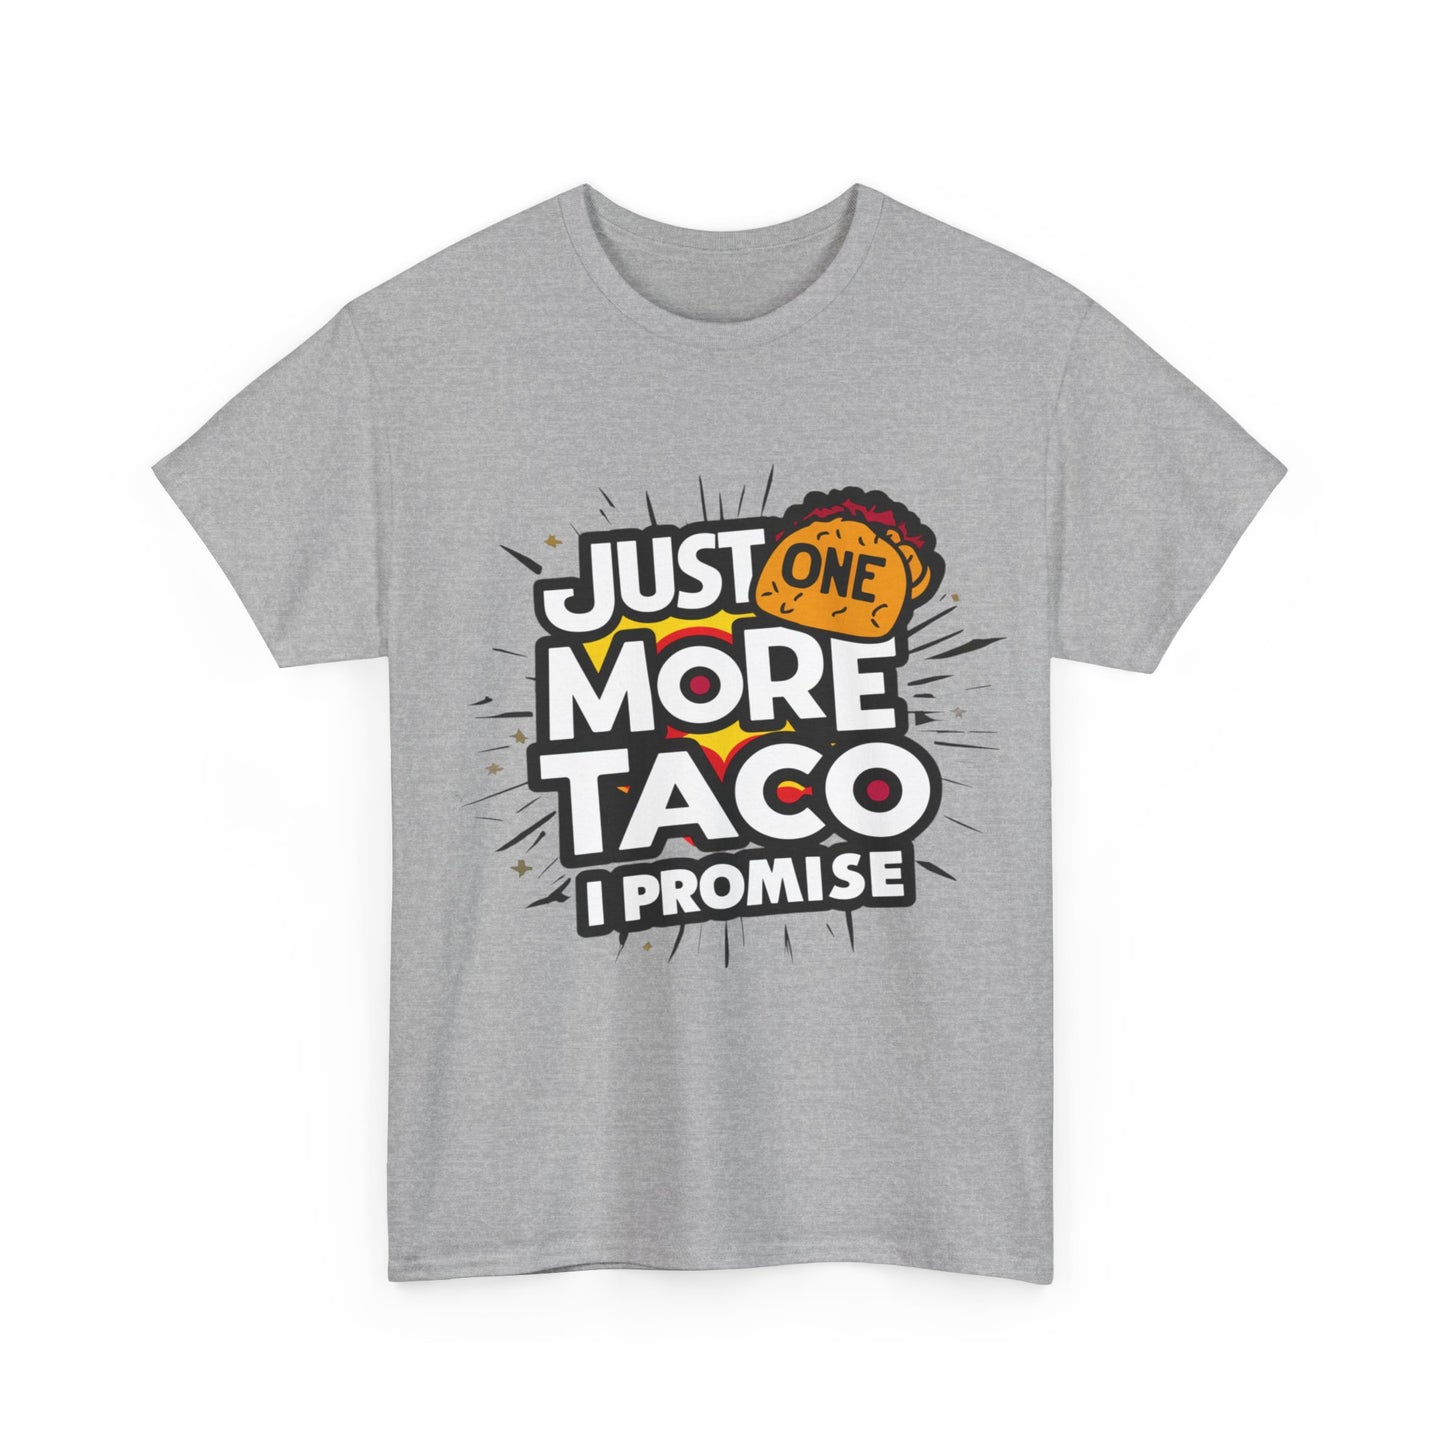 Copy of Just One More Taco I Promise Mexican Food Graphic Unisex Heavy Cotton Tee Cotton Funny Humorous Graphic Soft Premium Unisex Men Women Sport Grey T-shirt Birthday Gift-39